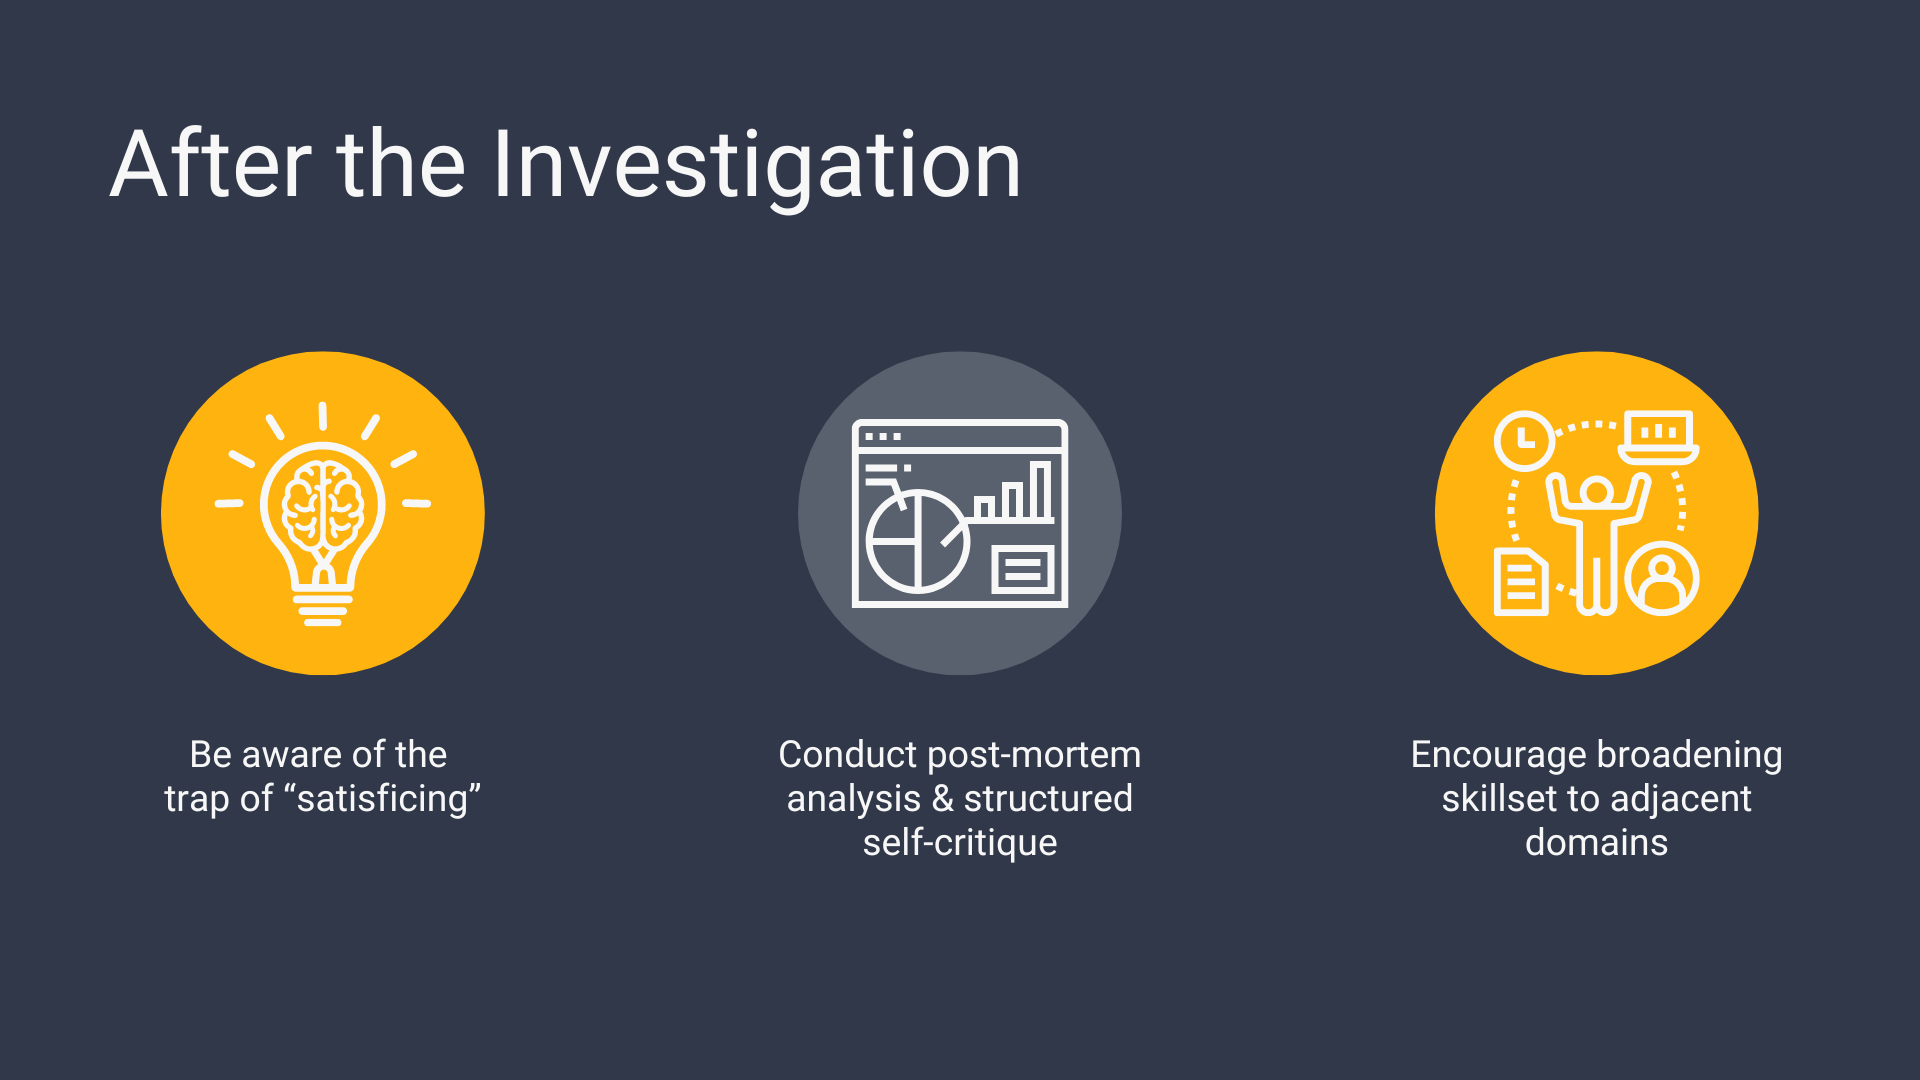 Three actions to take after the investigation